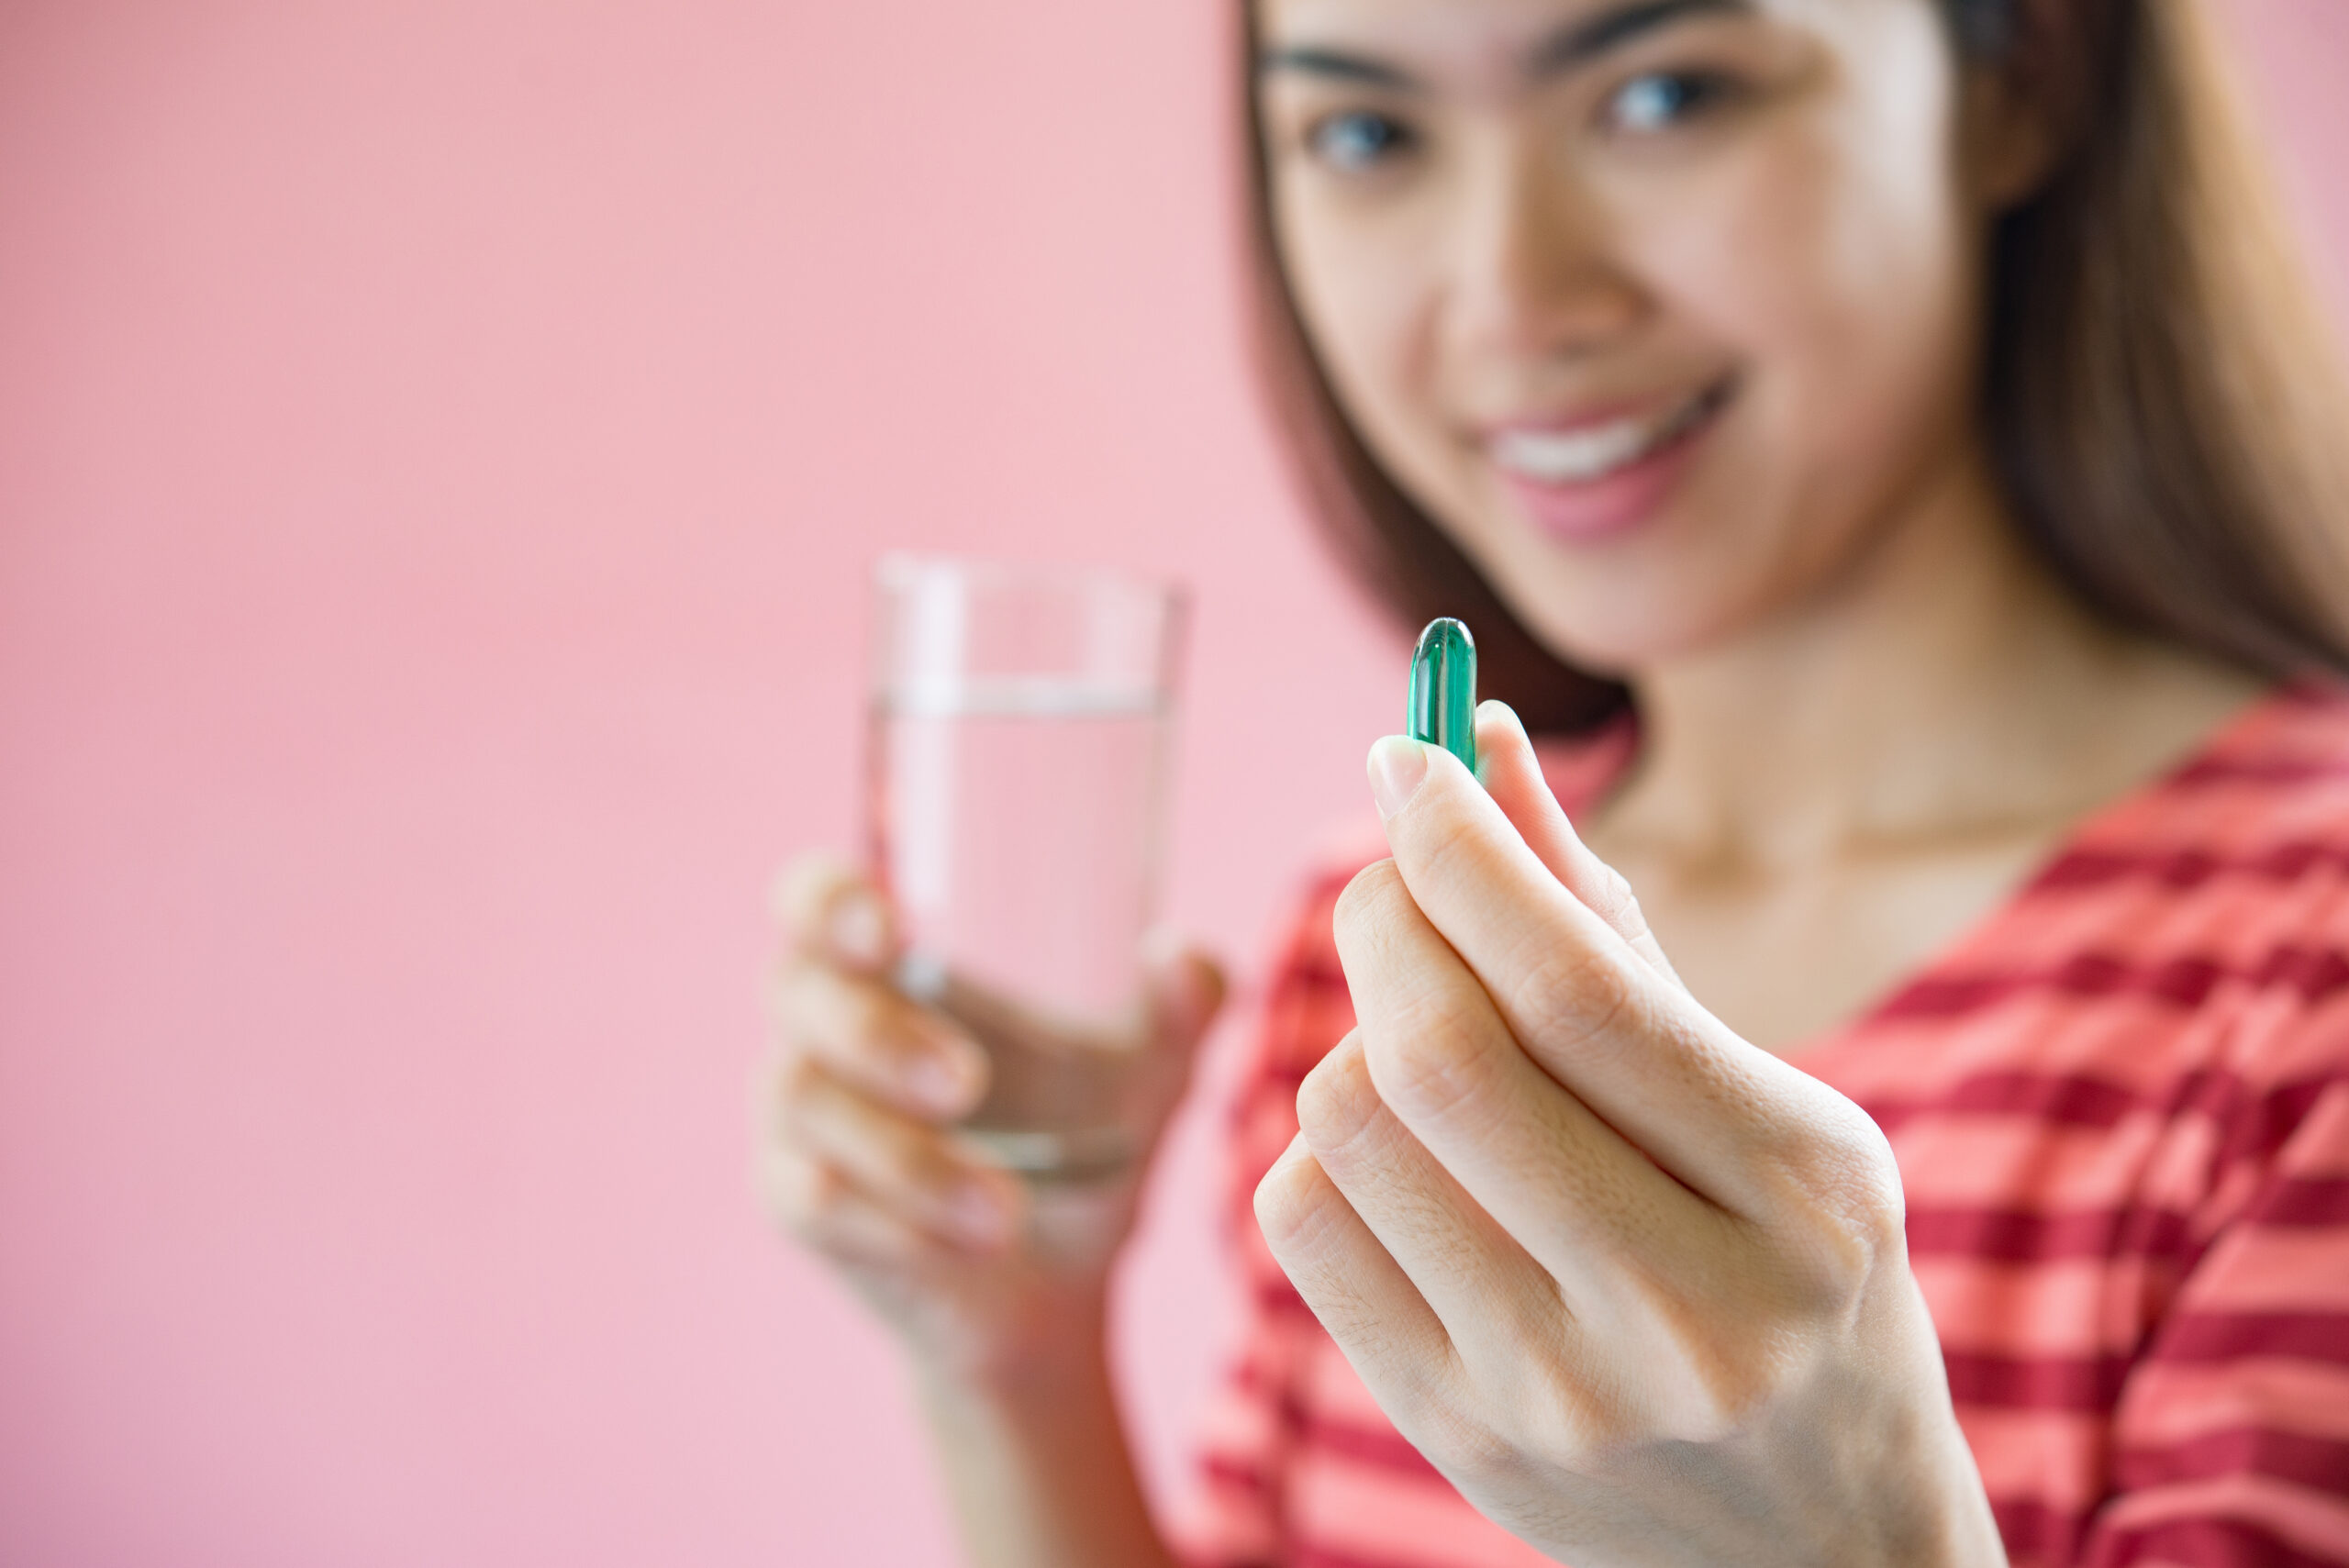 11 Things to Know About Using Birth Control and Antidepressants